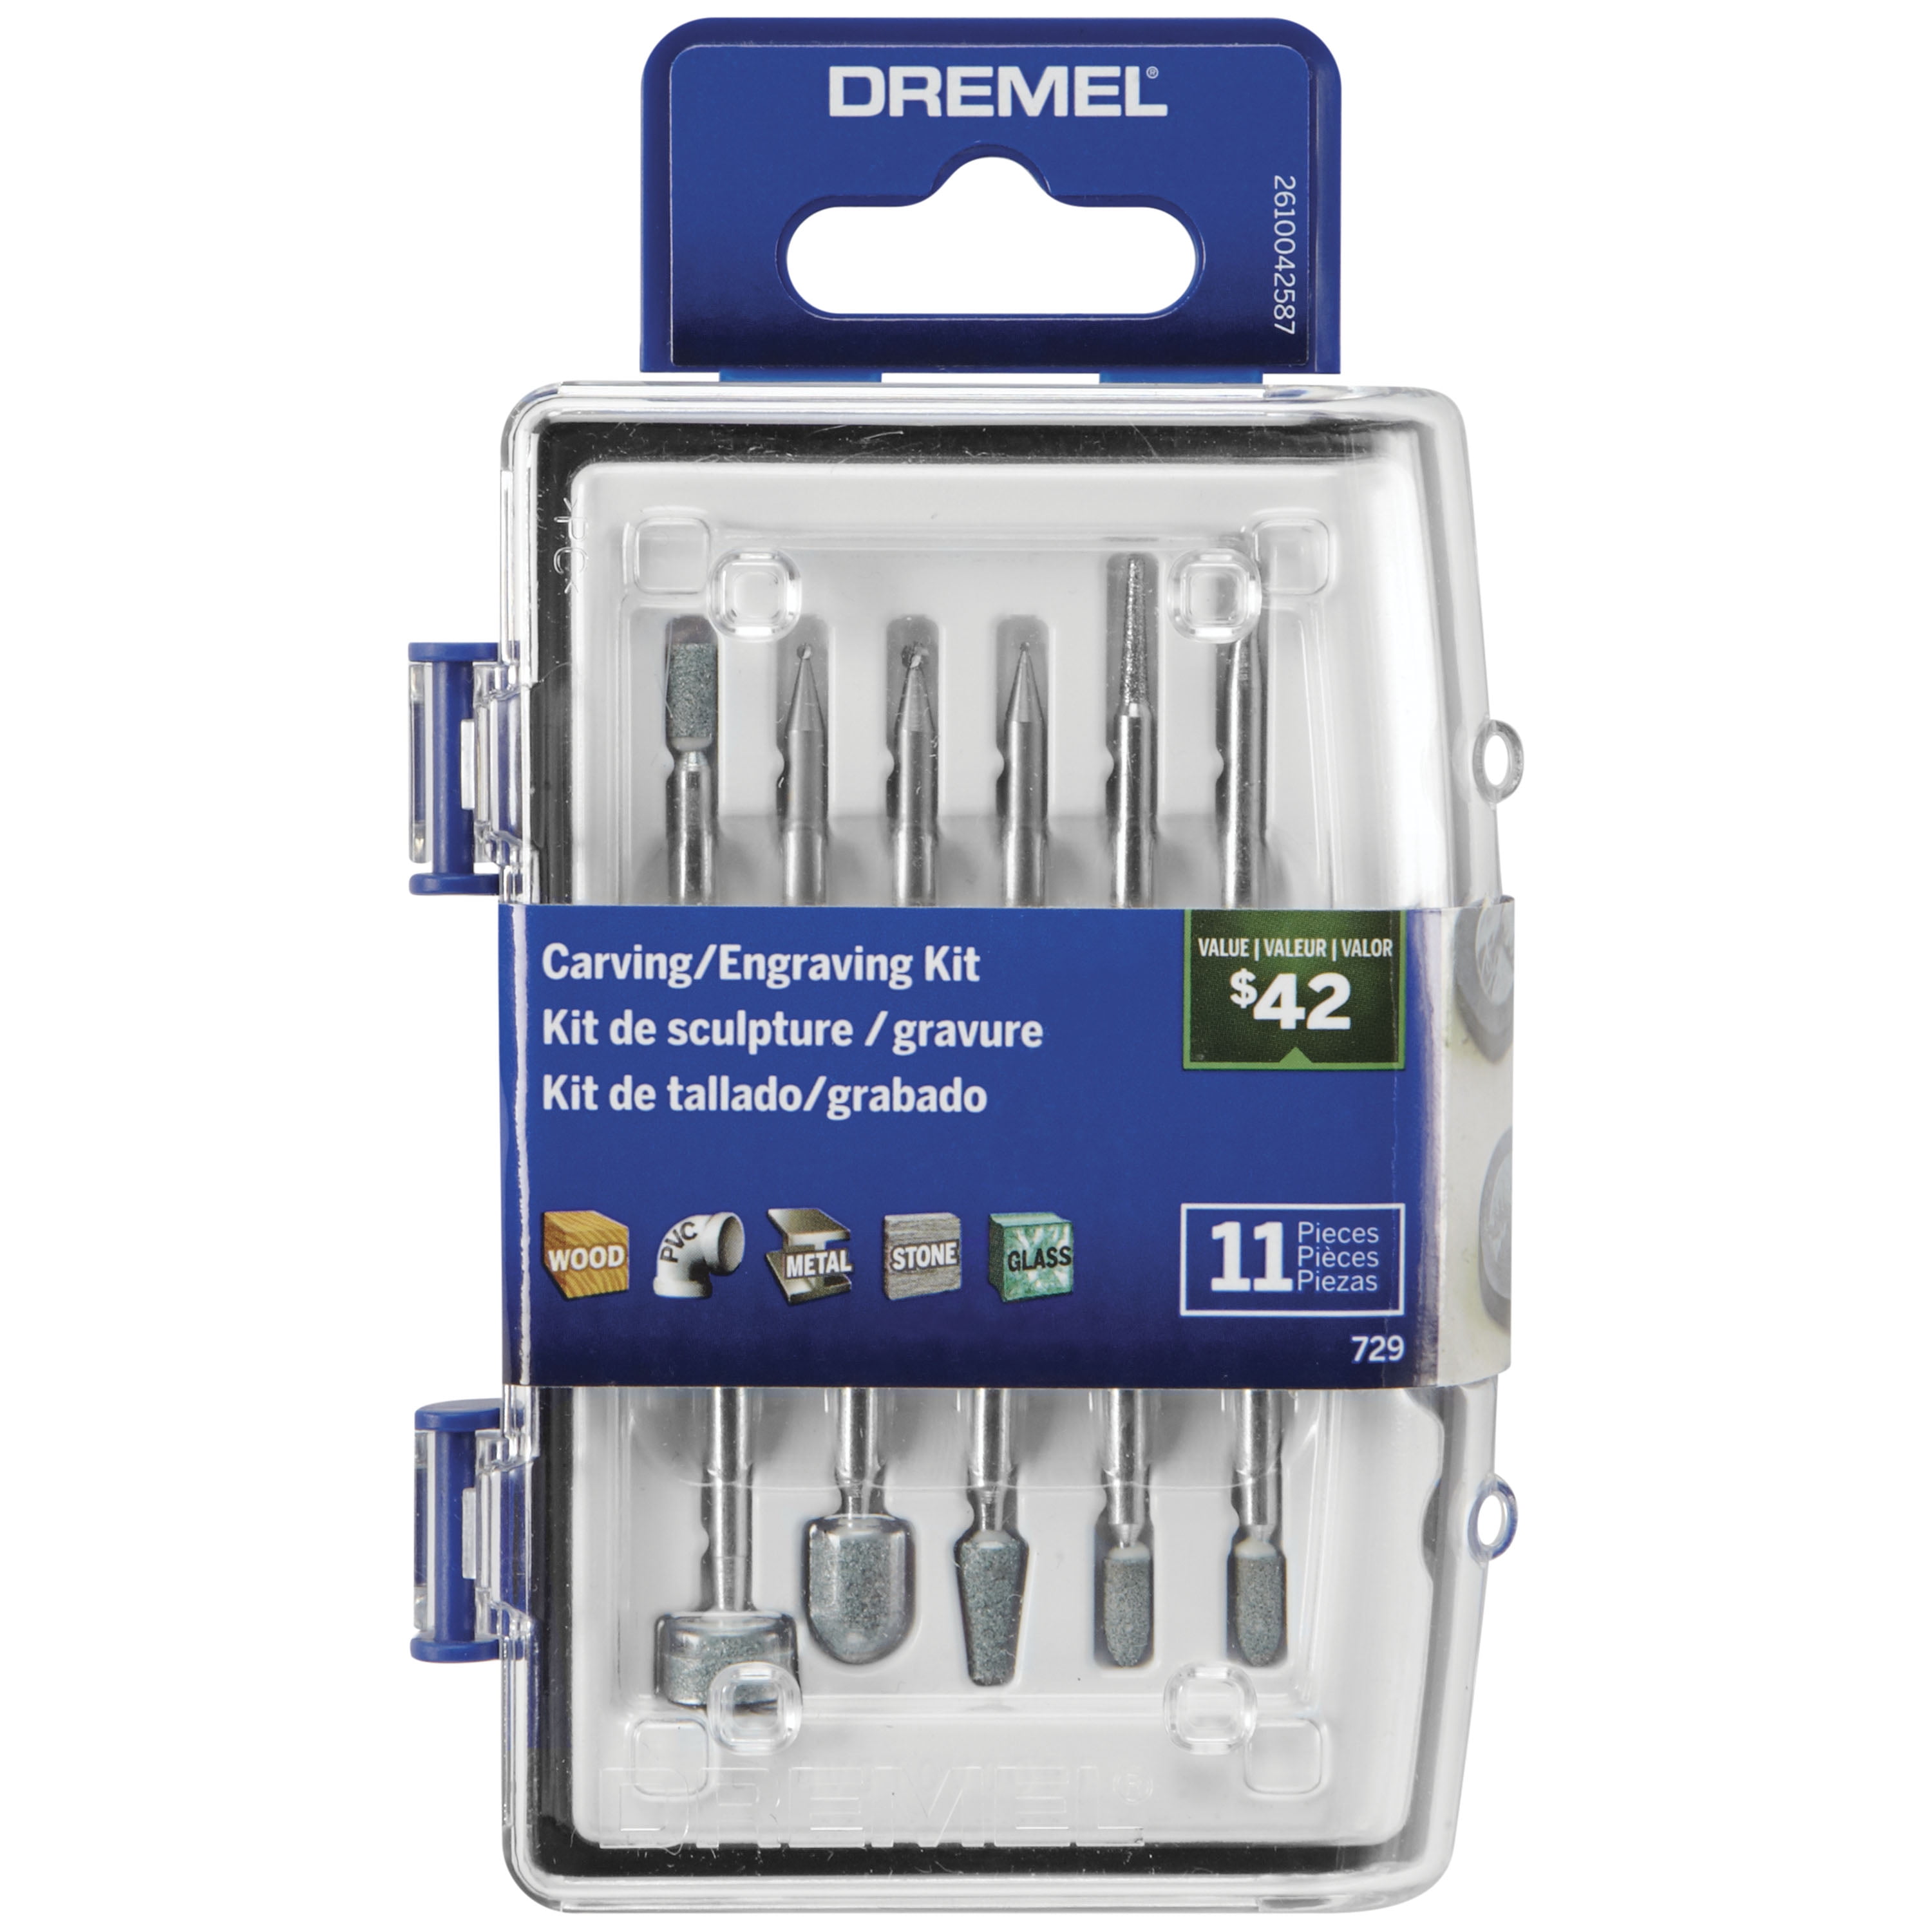 Dremel 729-02 11 PC Carving/Engraving Rotary Accessory Micro Kit